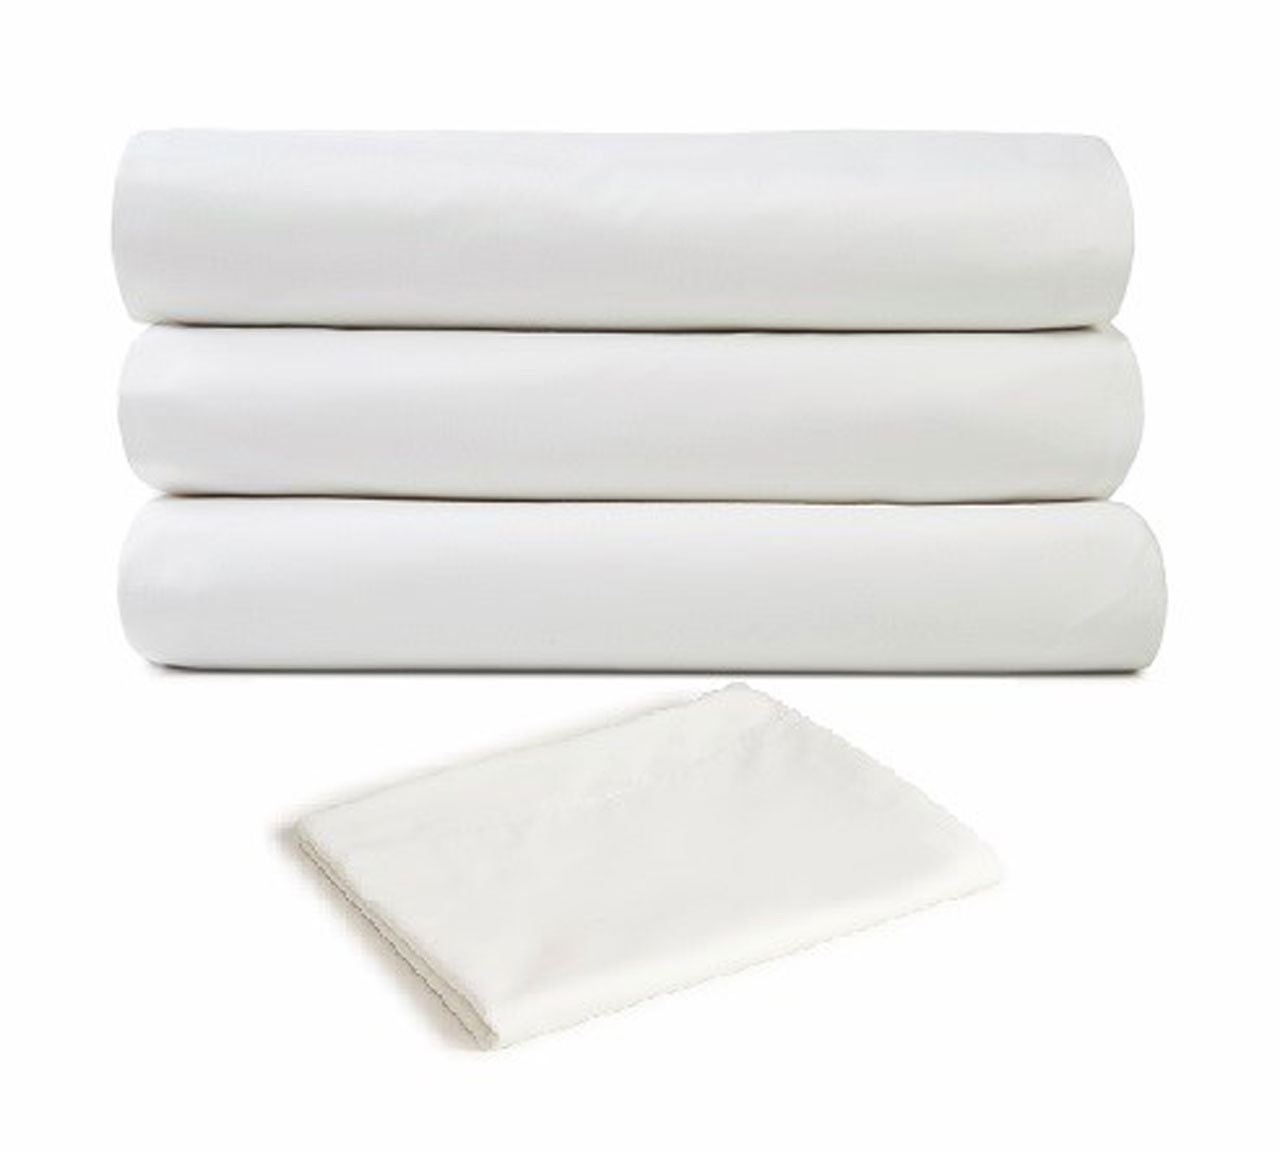 Is the T310 Premium Bed Sheets' 60/40 cotton poly blend wrinkle-resistant?